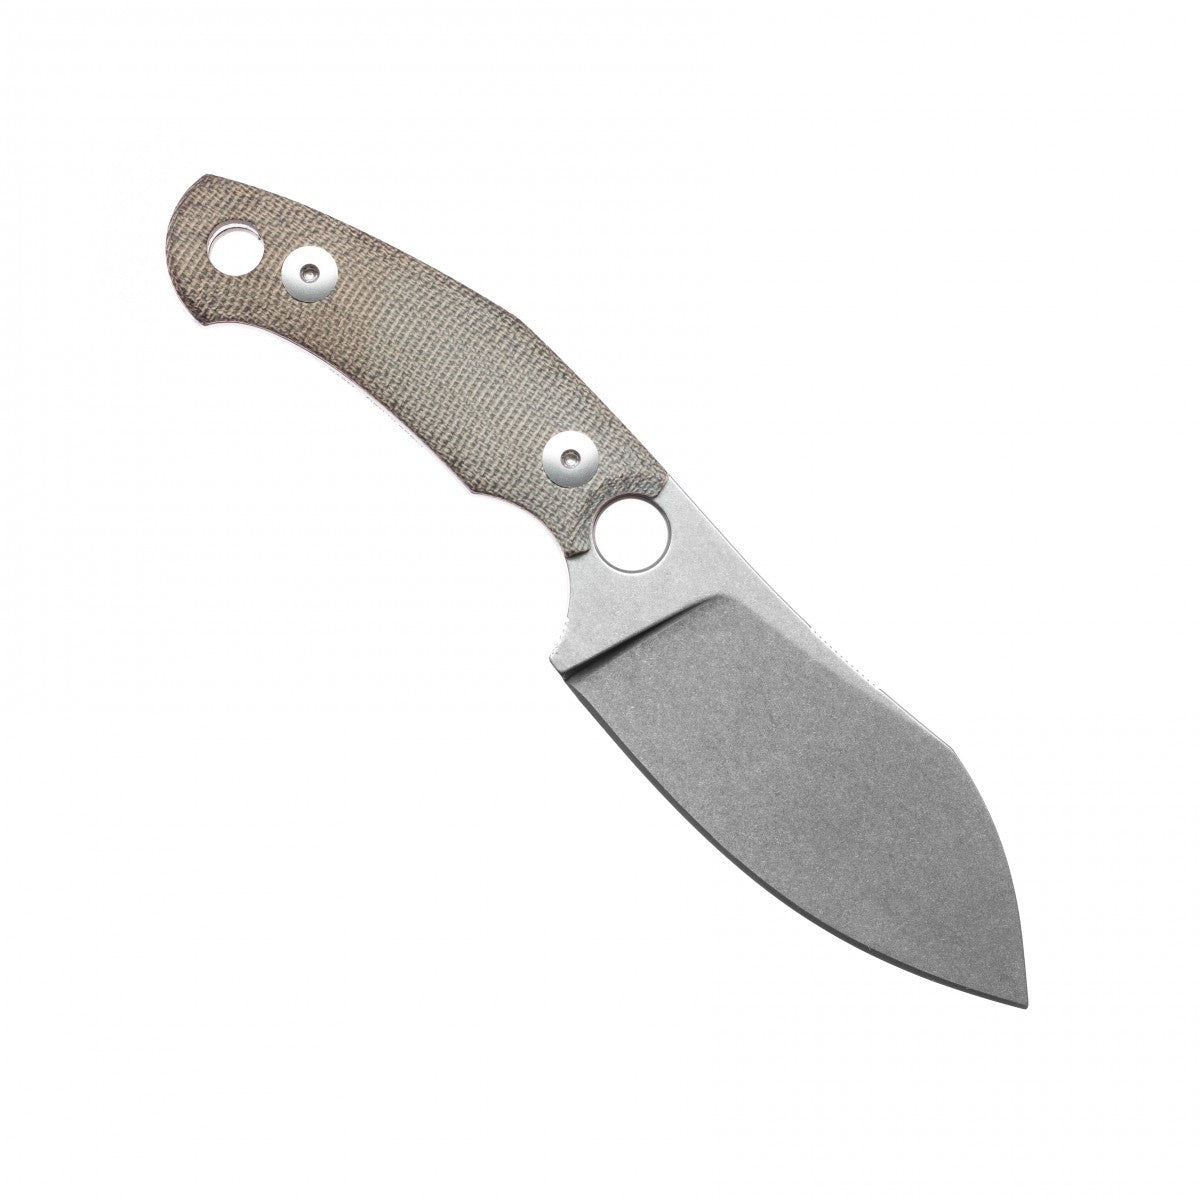 GiantMouse Knives GMF1-XL - Fixed Blade - N690 Steel - Micarta Handle - 0